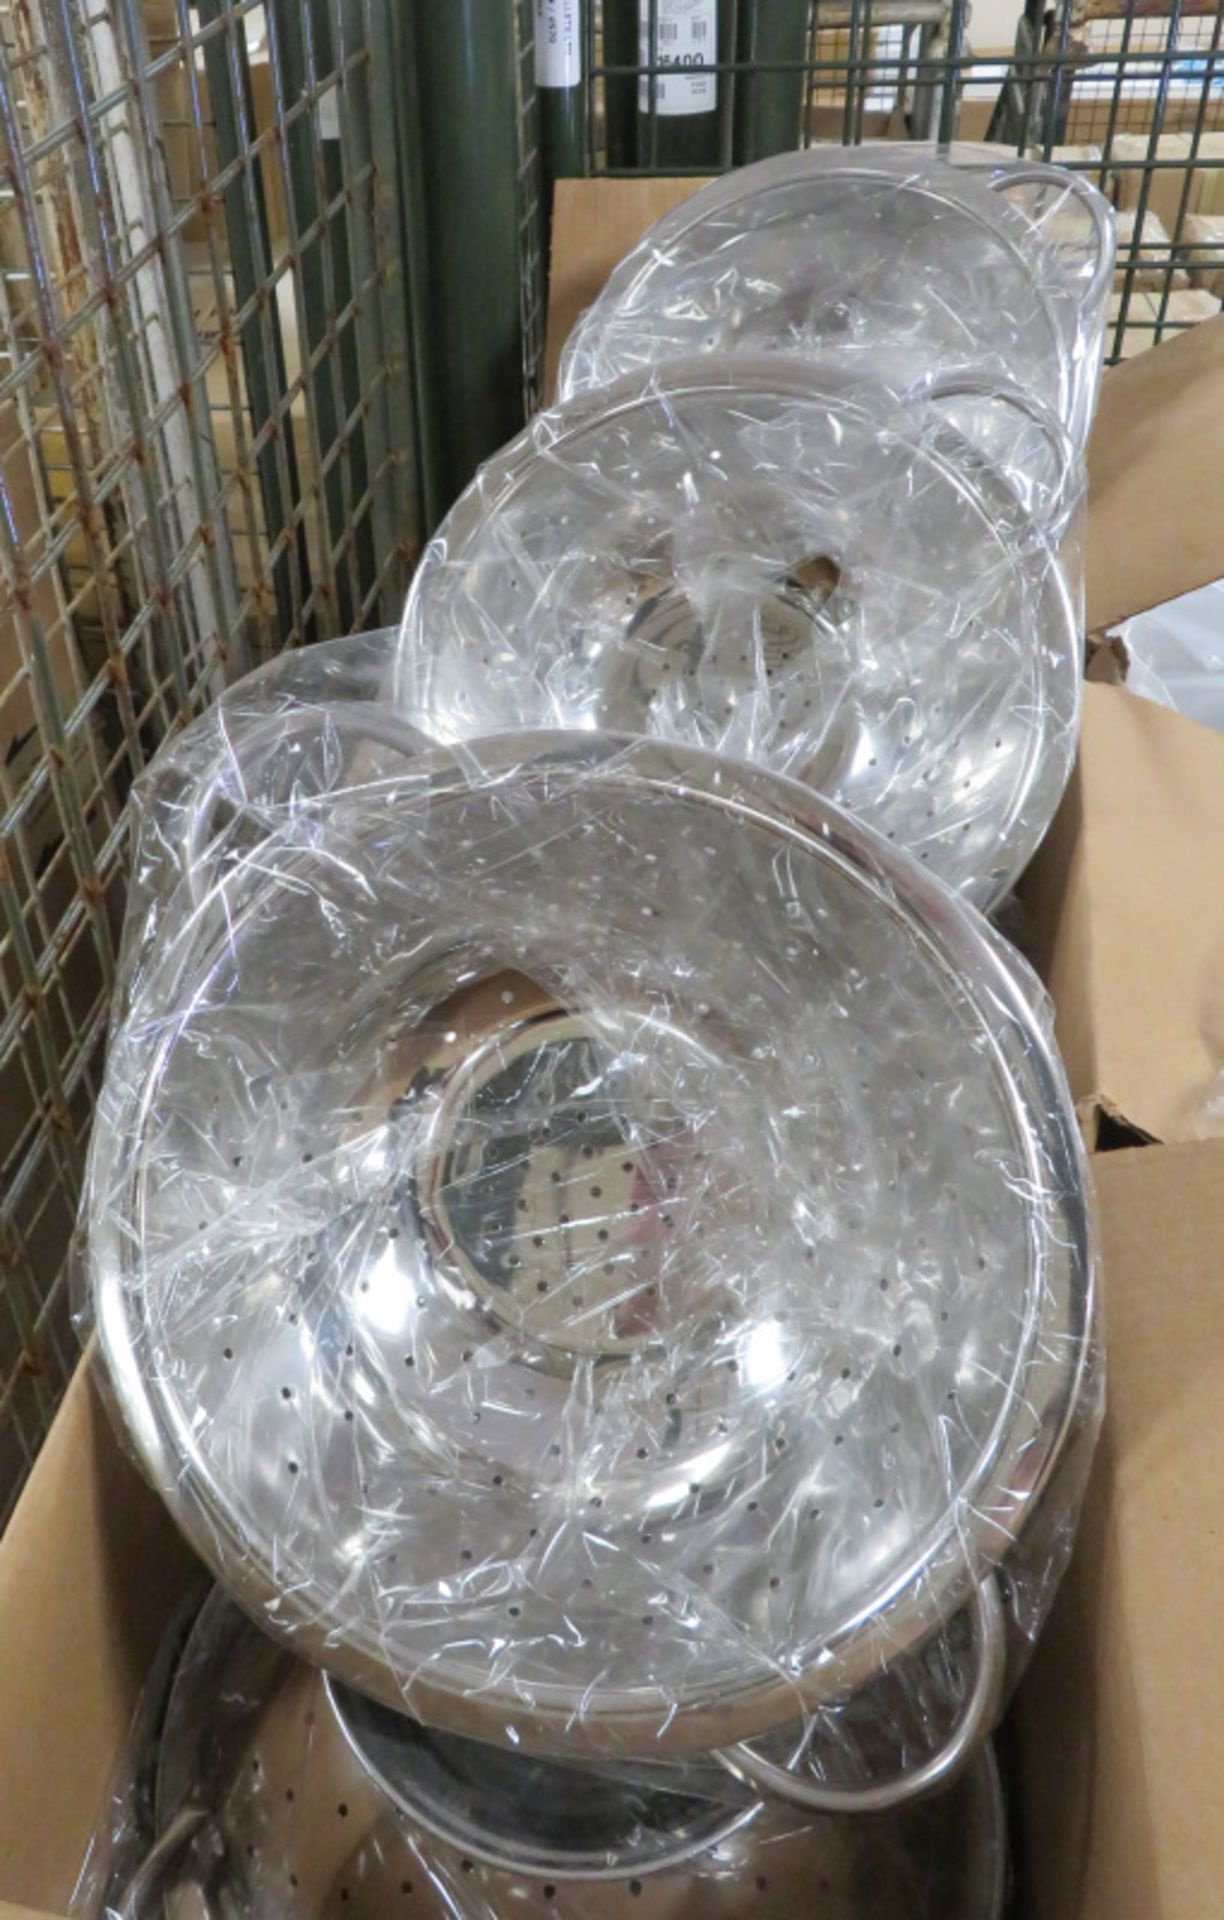 Various Catering Equipment - 6x Deep Walled Salad Bowls, 36x 9 inch Vegetable Colanders & more - Image 3 of 4